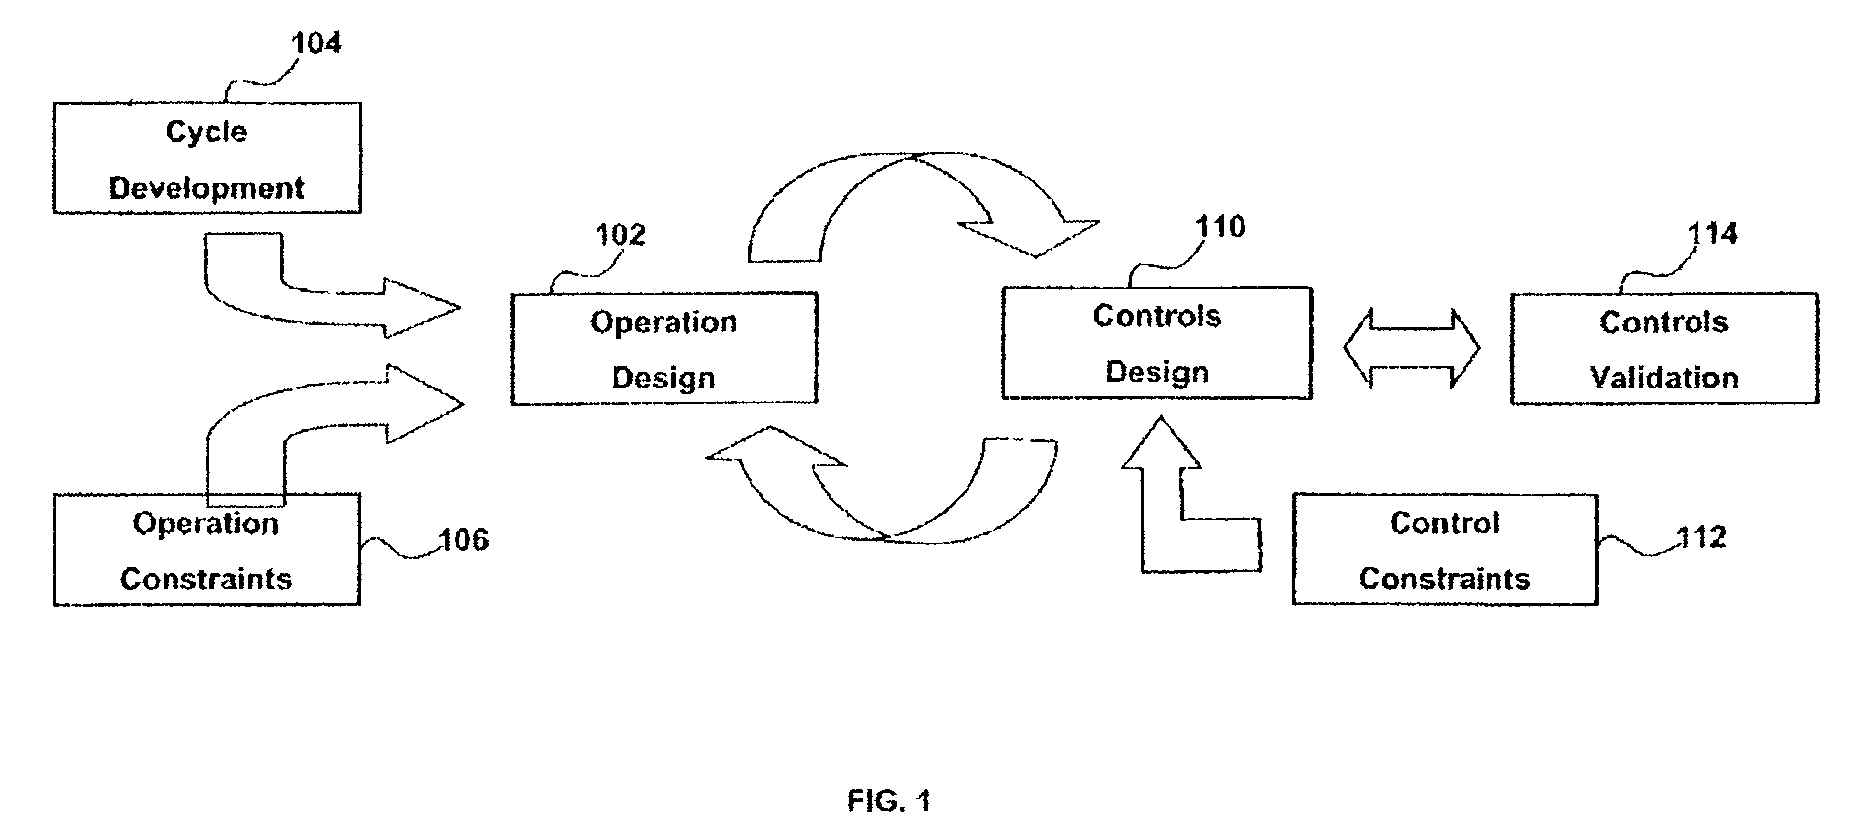 Method and system for model based control of heavy duty gas turbine